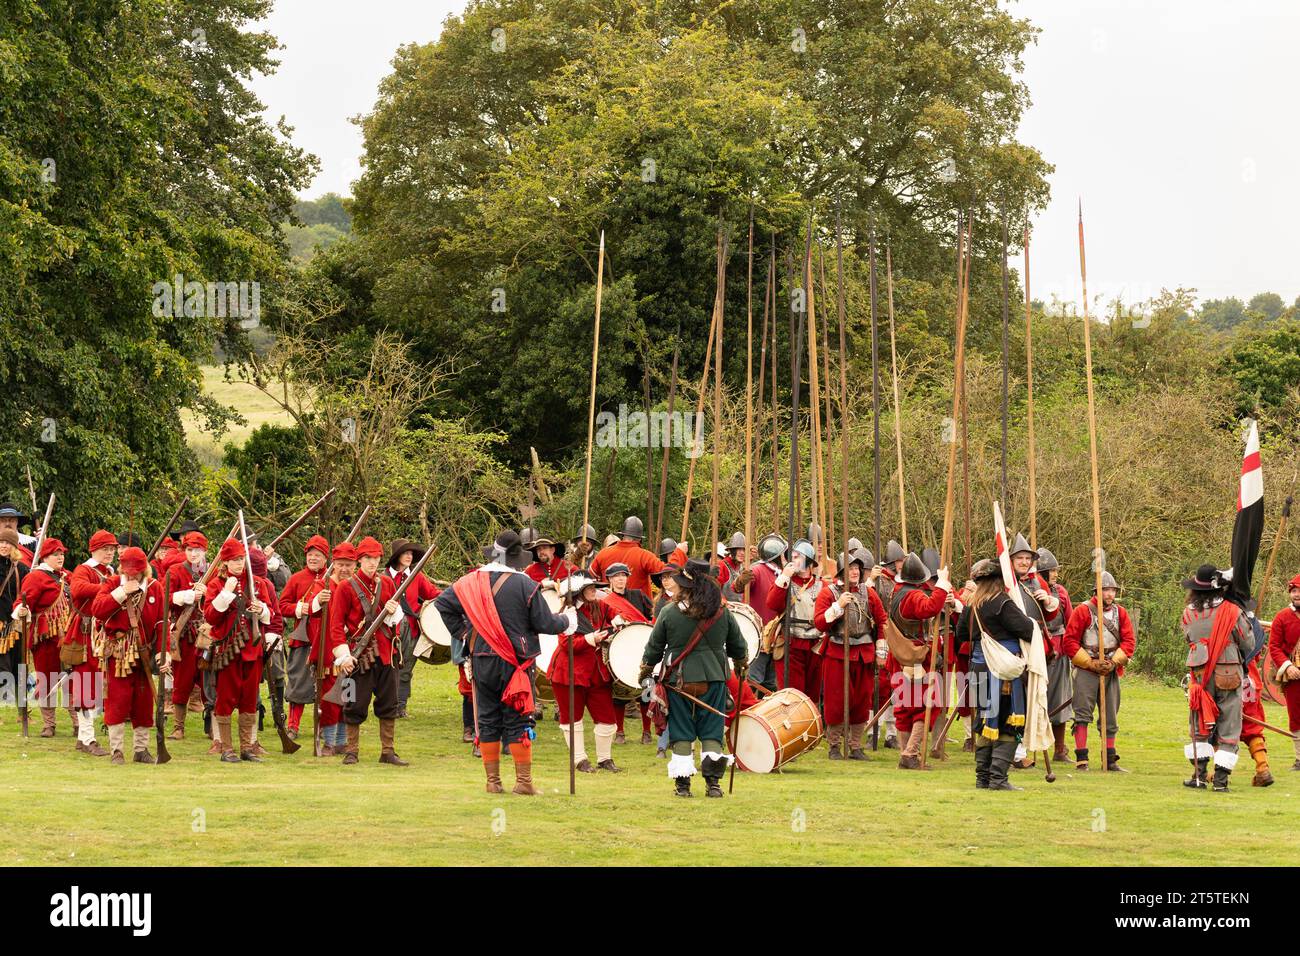 Opposing parliamentarian and royalist forces - reenactment of the Siege of Basing House, English civil war by the English Civil War Society 16.09.23 Stock Photo